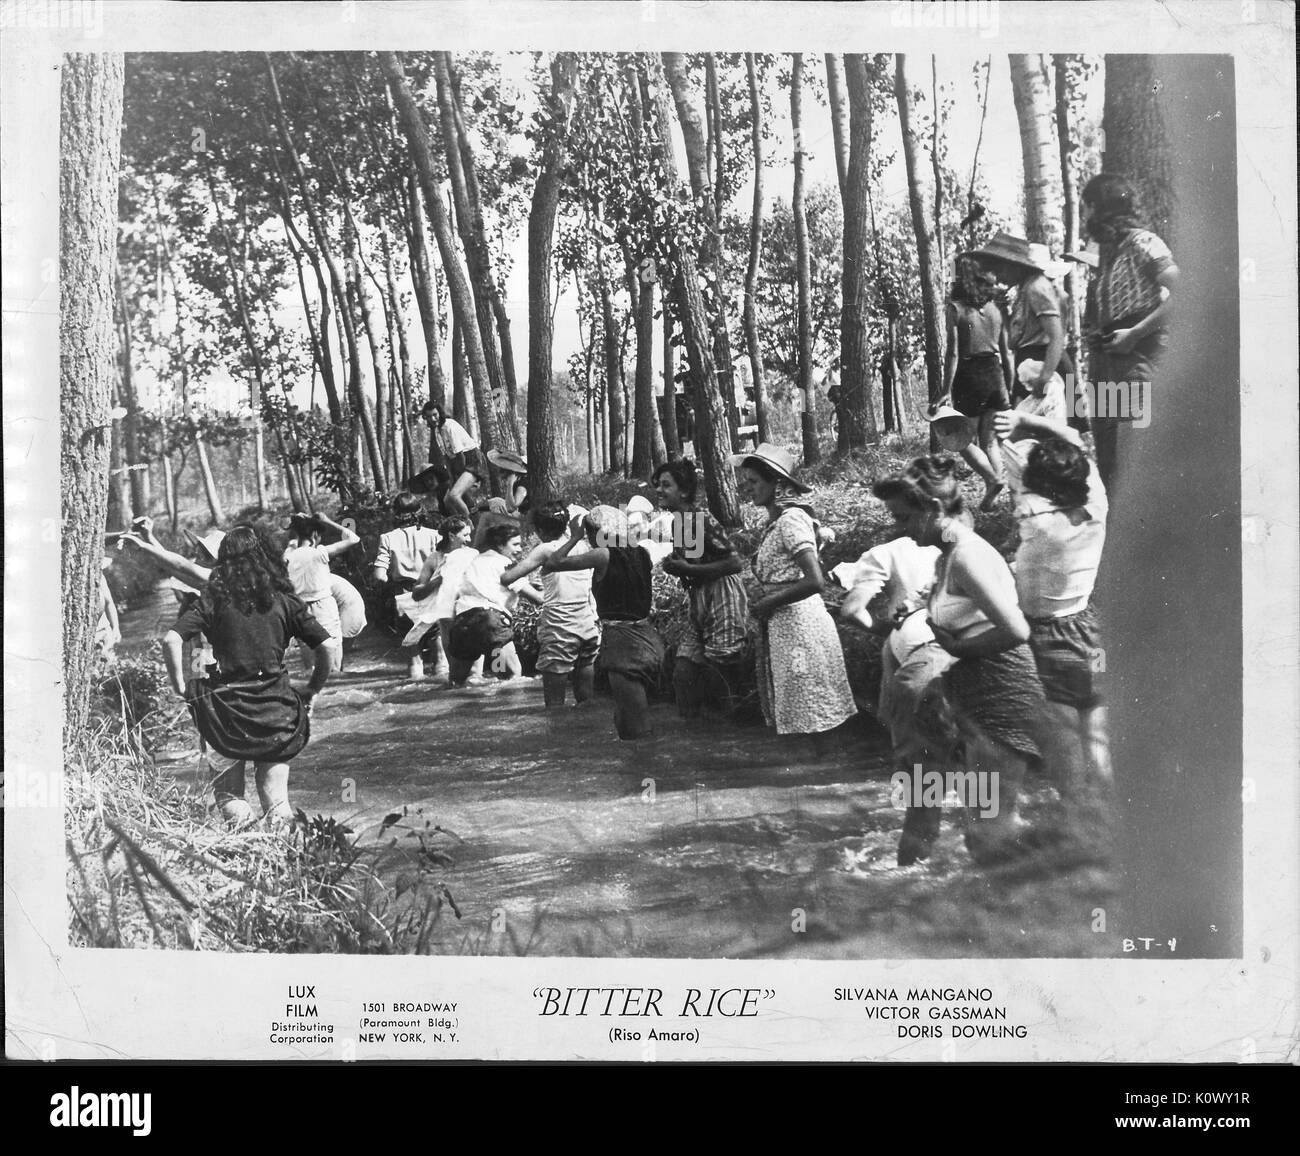 A movie still scene from 'Bitter Rice' (1949 Italian film), showing a group of young women laughingly crossing a river with some of them pulling up their dresses to keep it from getting wet, 1949. Stock Photo